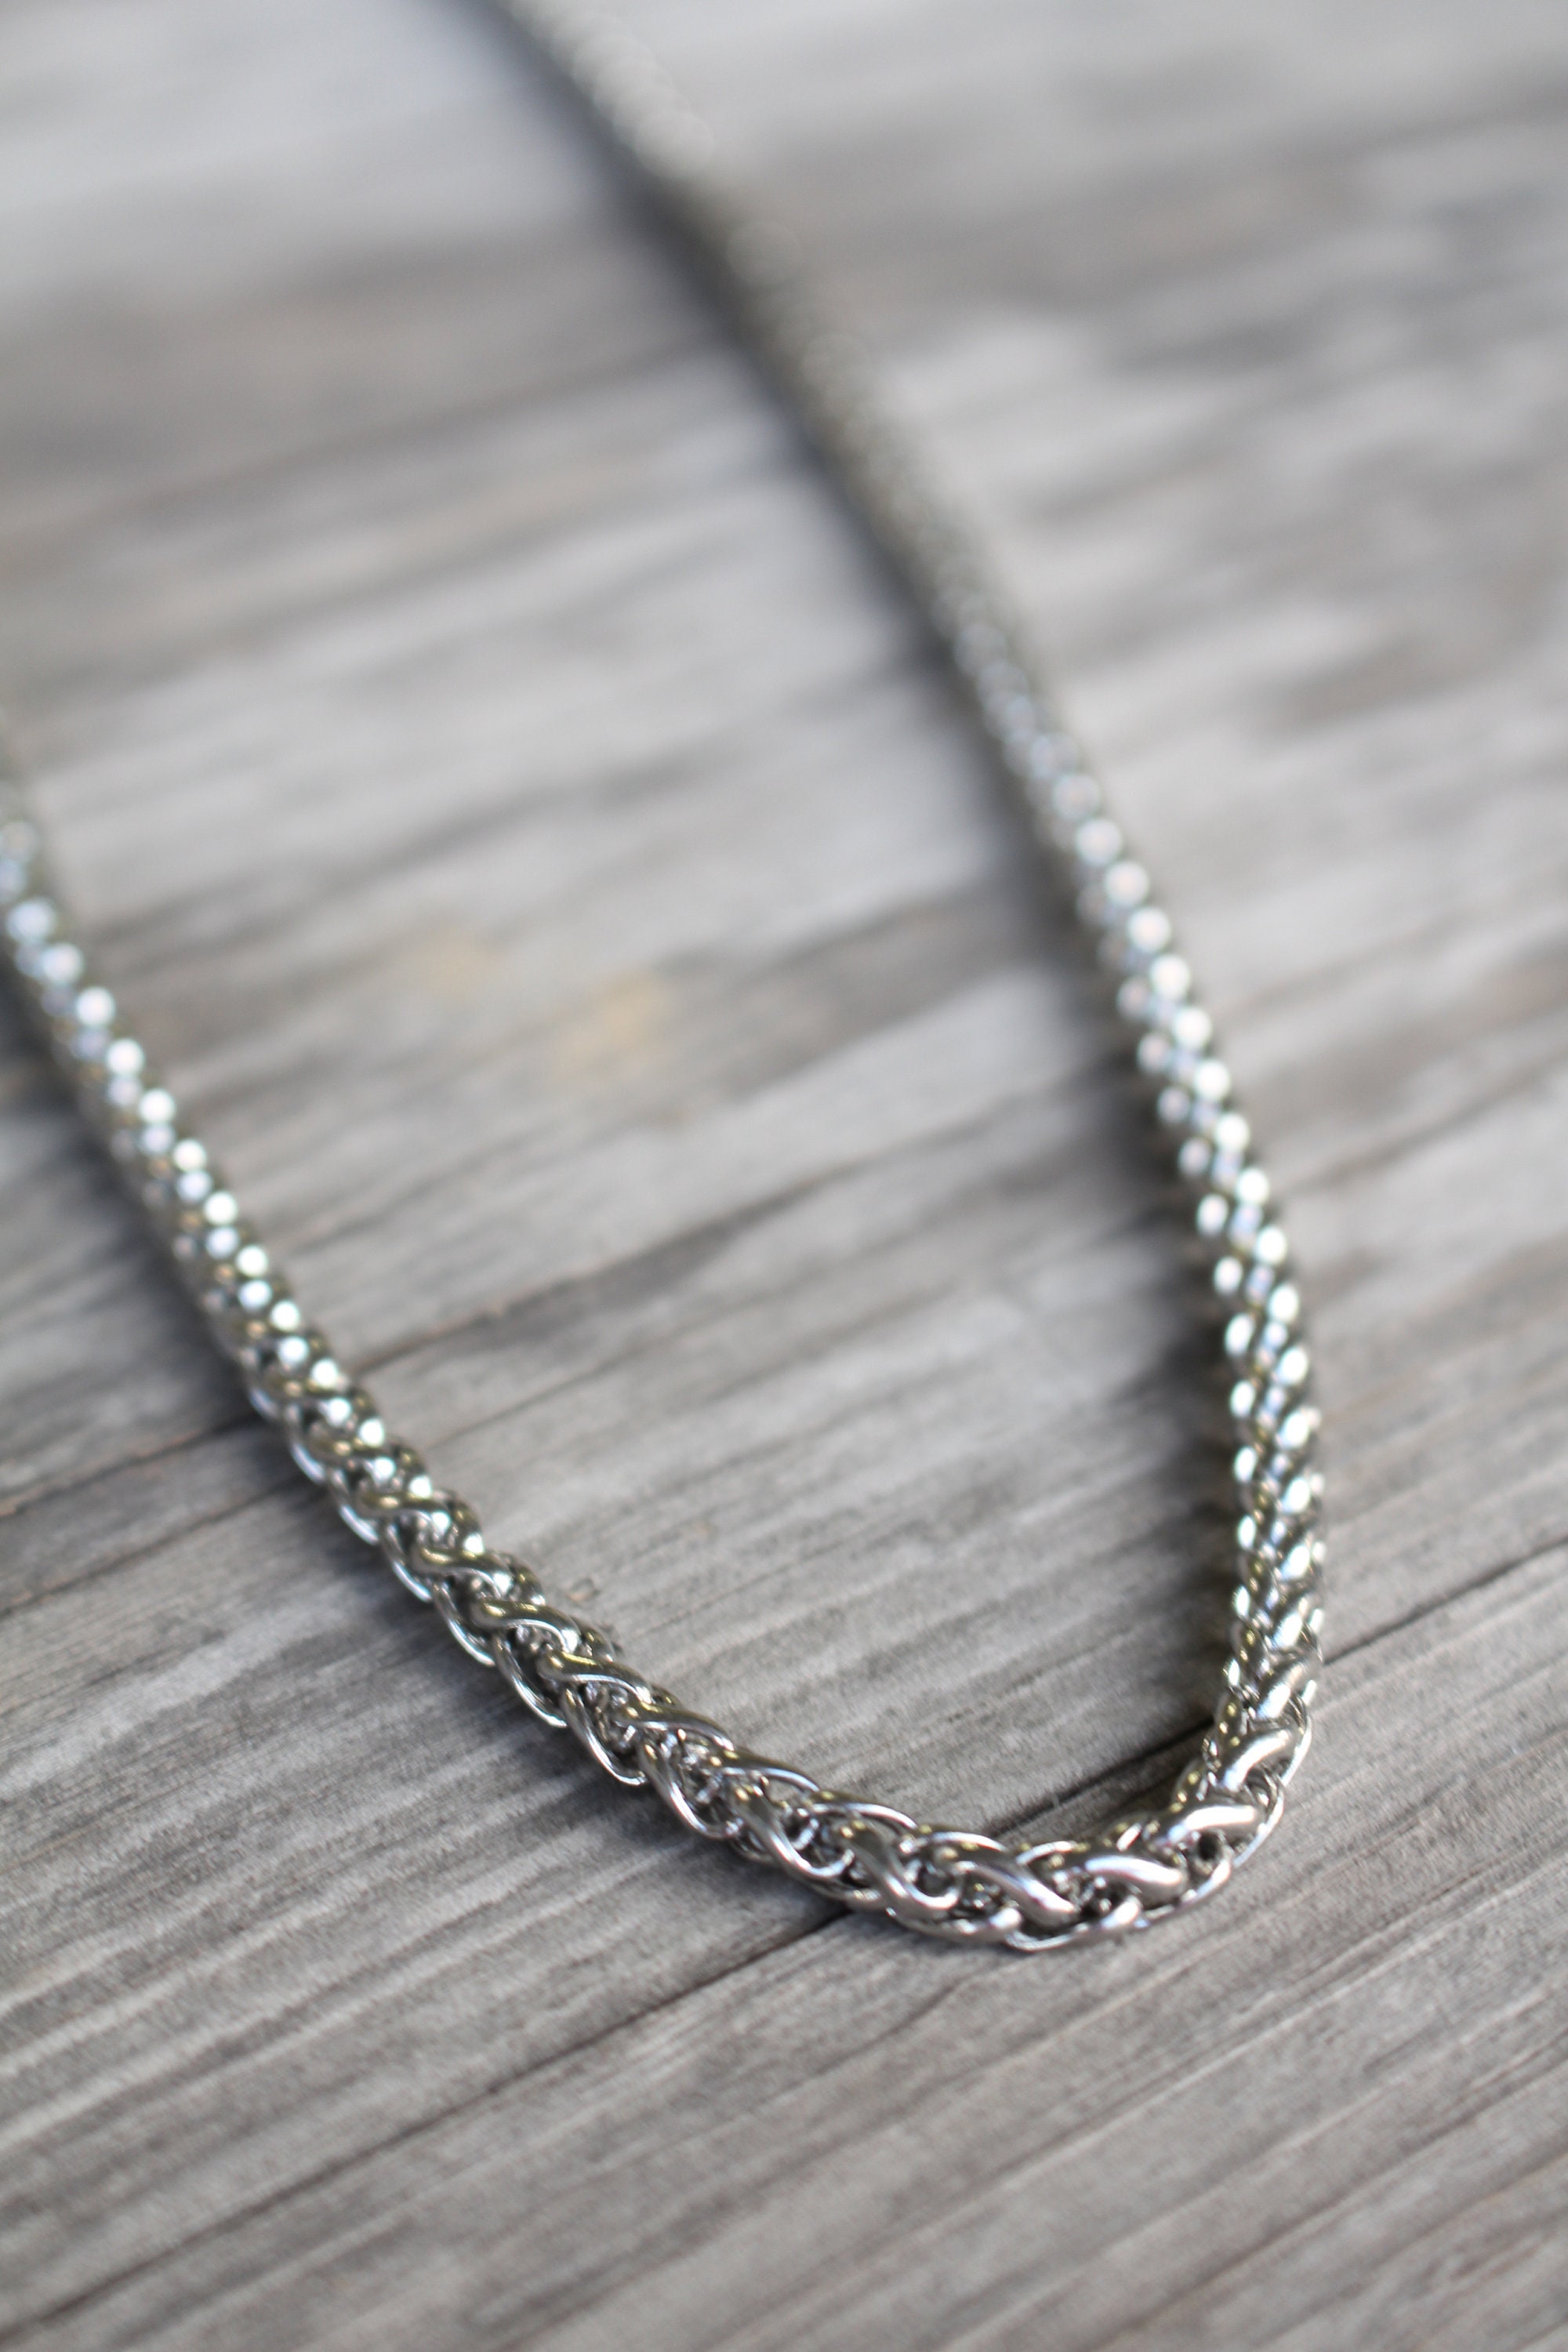 All Parts Stainless Curb Chain Stainless Steel Necklace Chain Lobster Clasp sizes 14 to 30 inch 